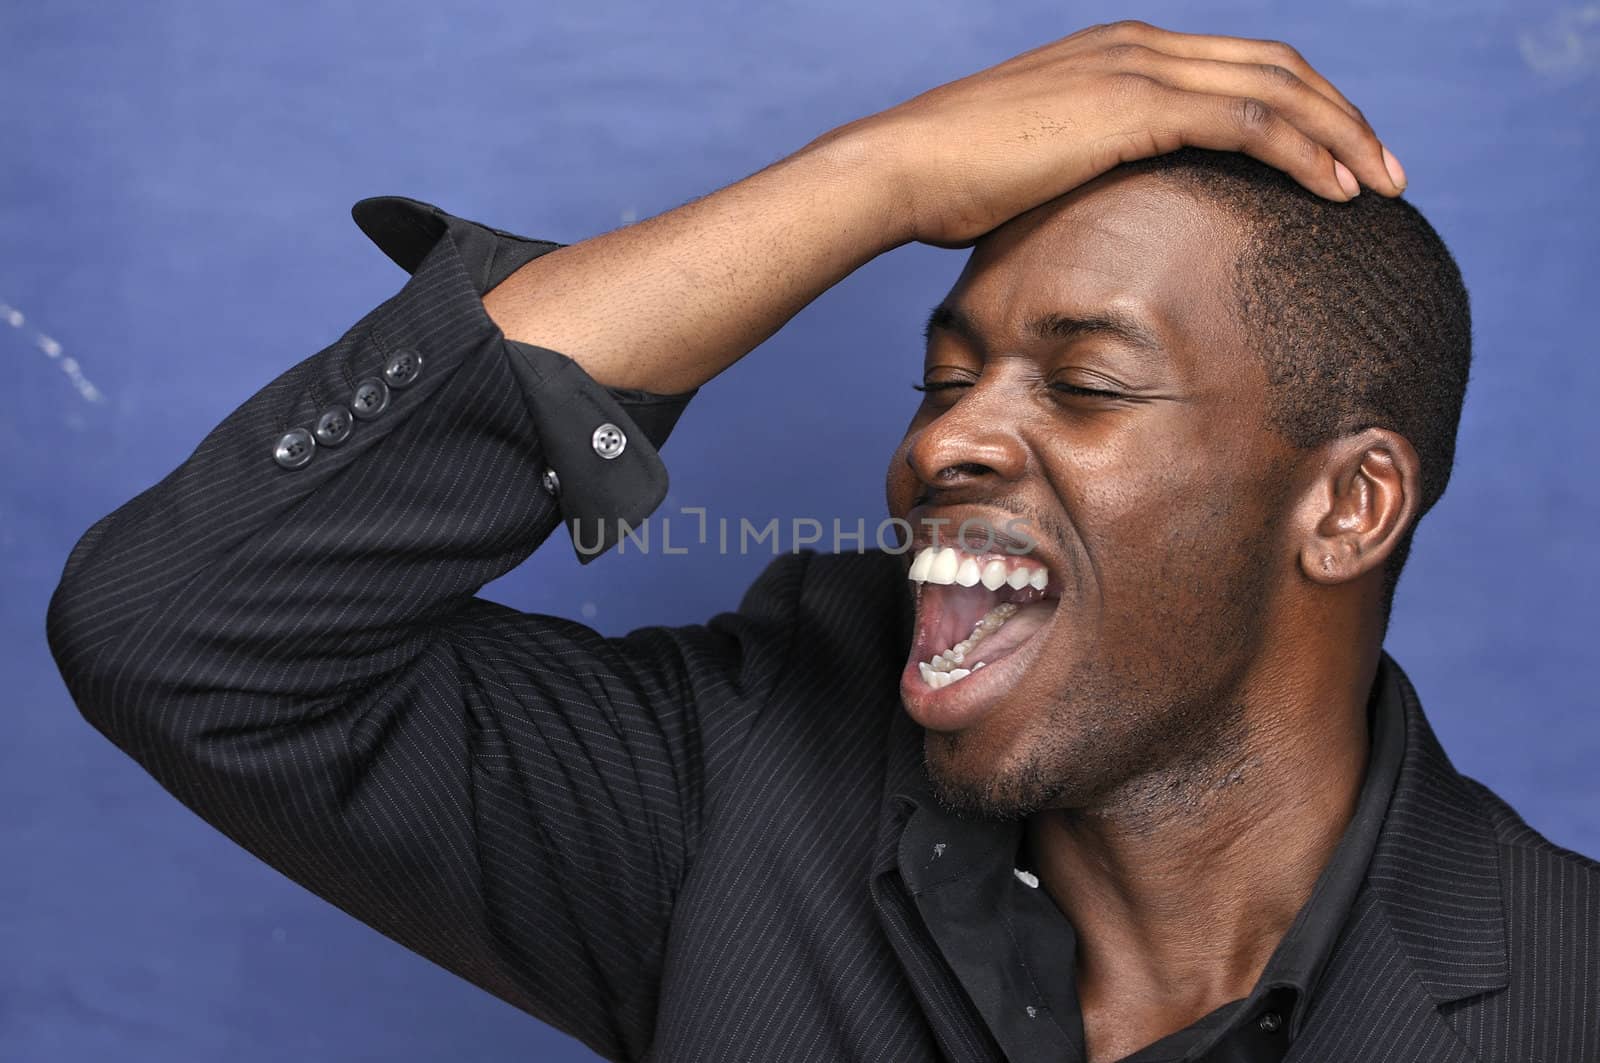 Young handsome black man in designer shirt yells with excitement on blue background